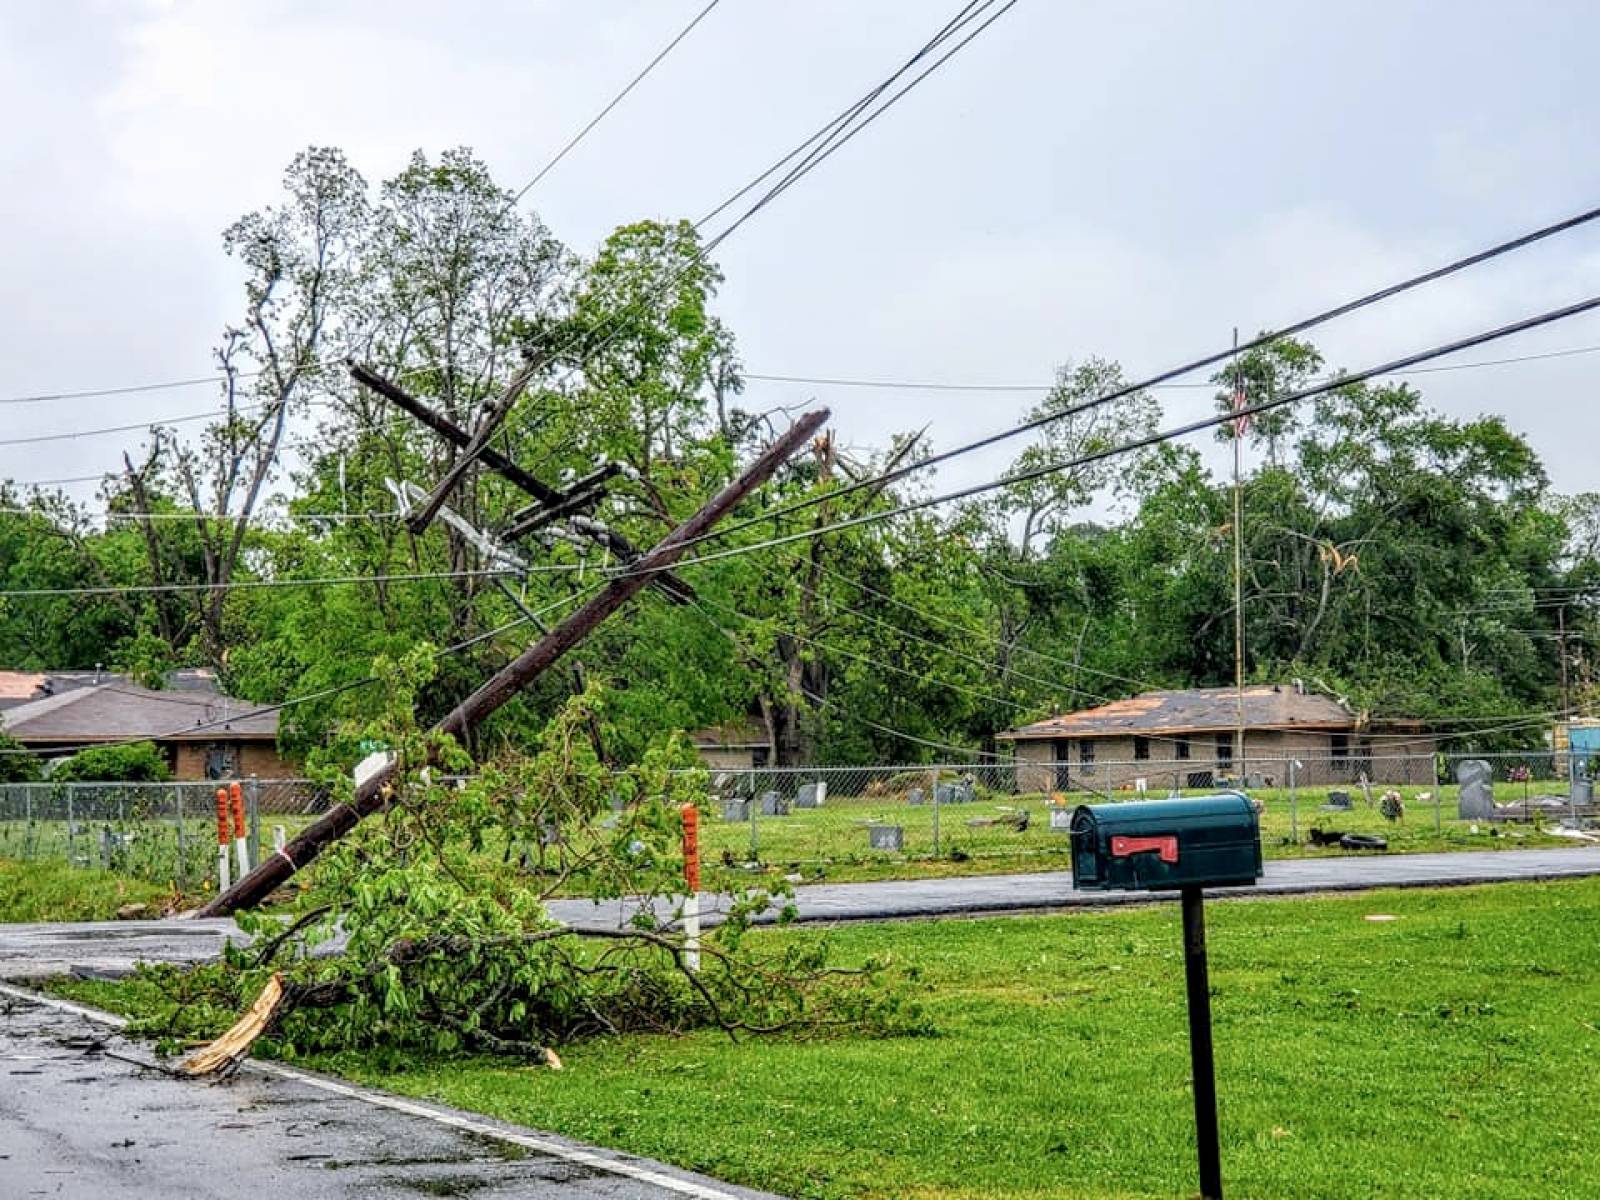 Social media images of damaged power lines in the aftermath of a tornado in Monroe, Louisiana